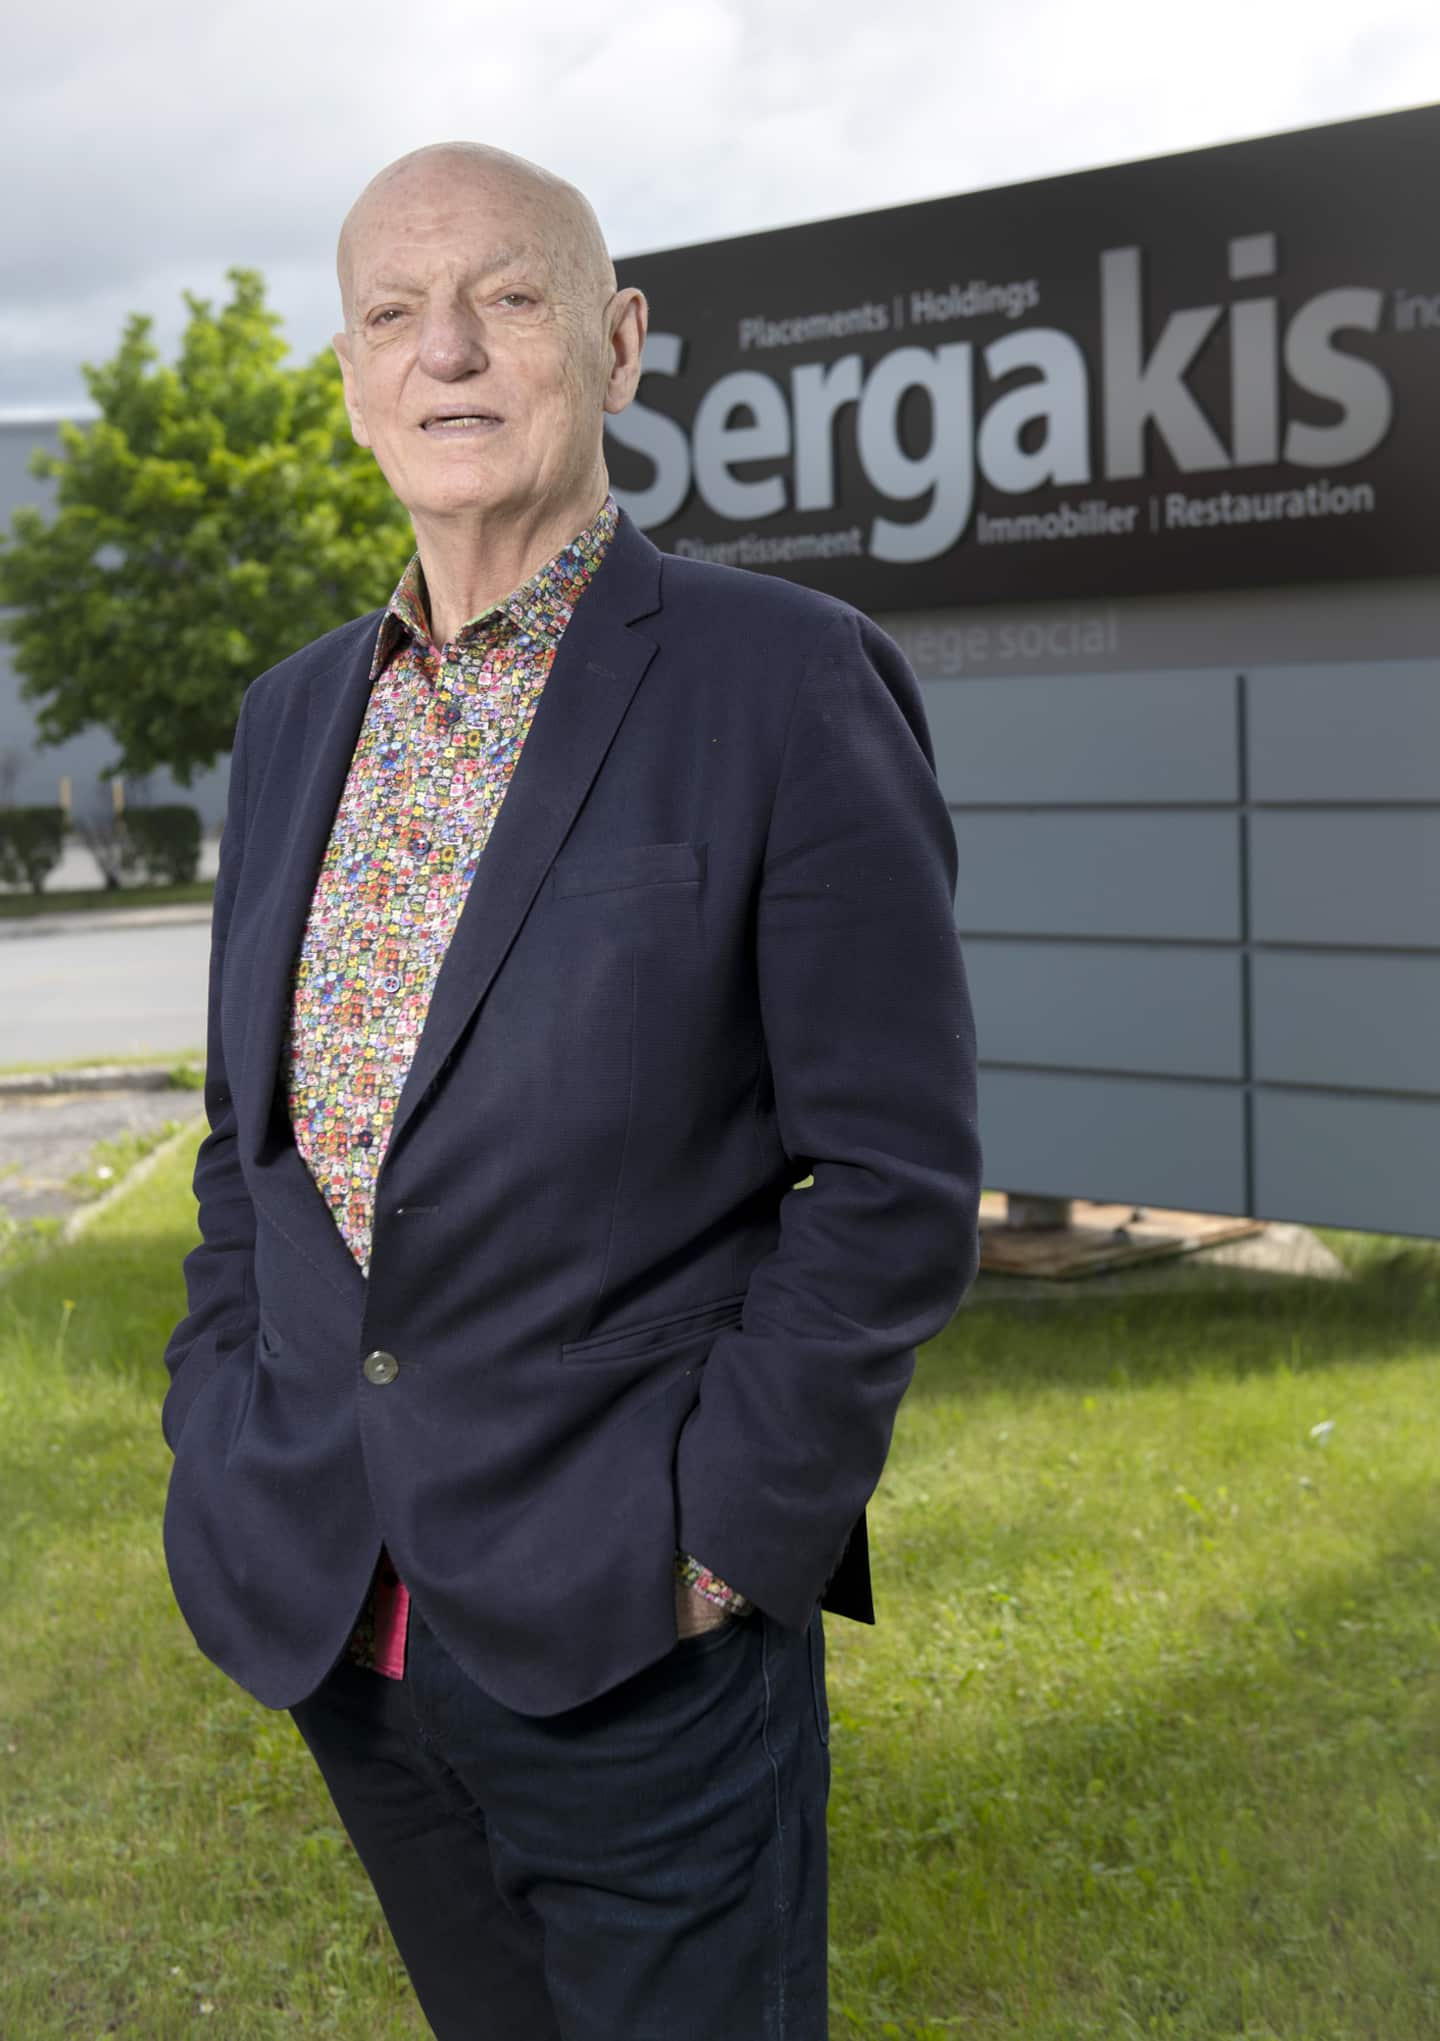 Peter Sergakis: a tenant who pitches, but resists blows